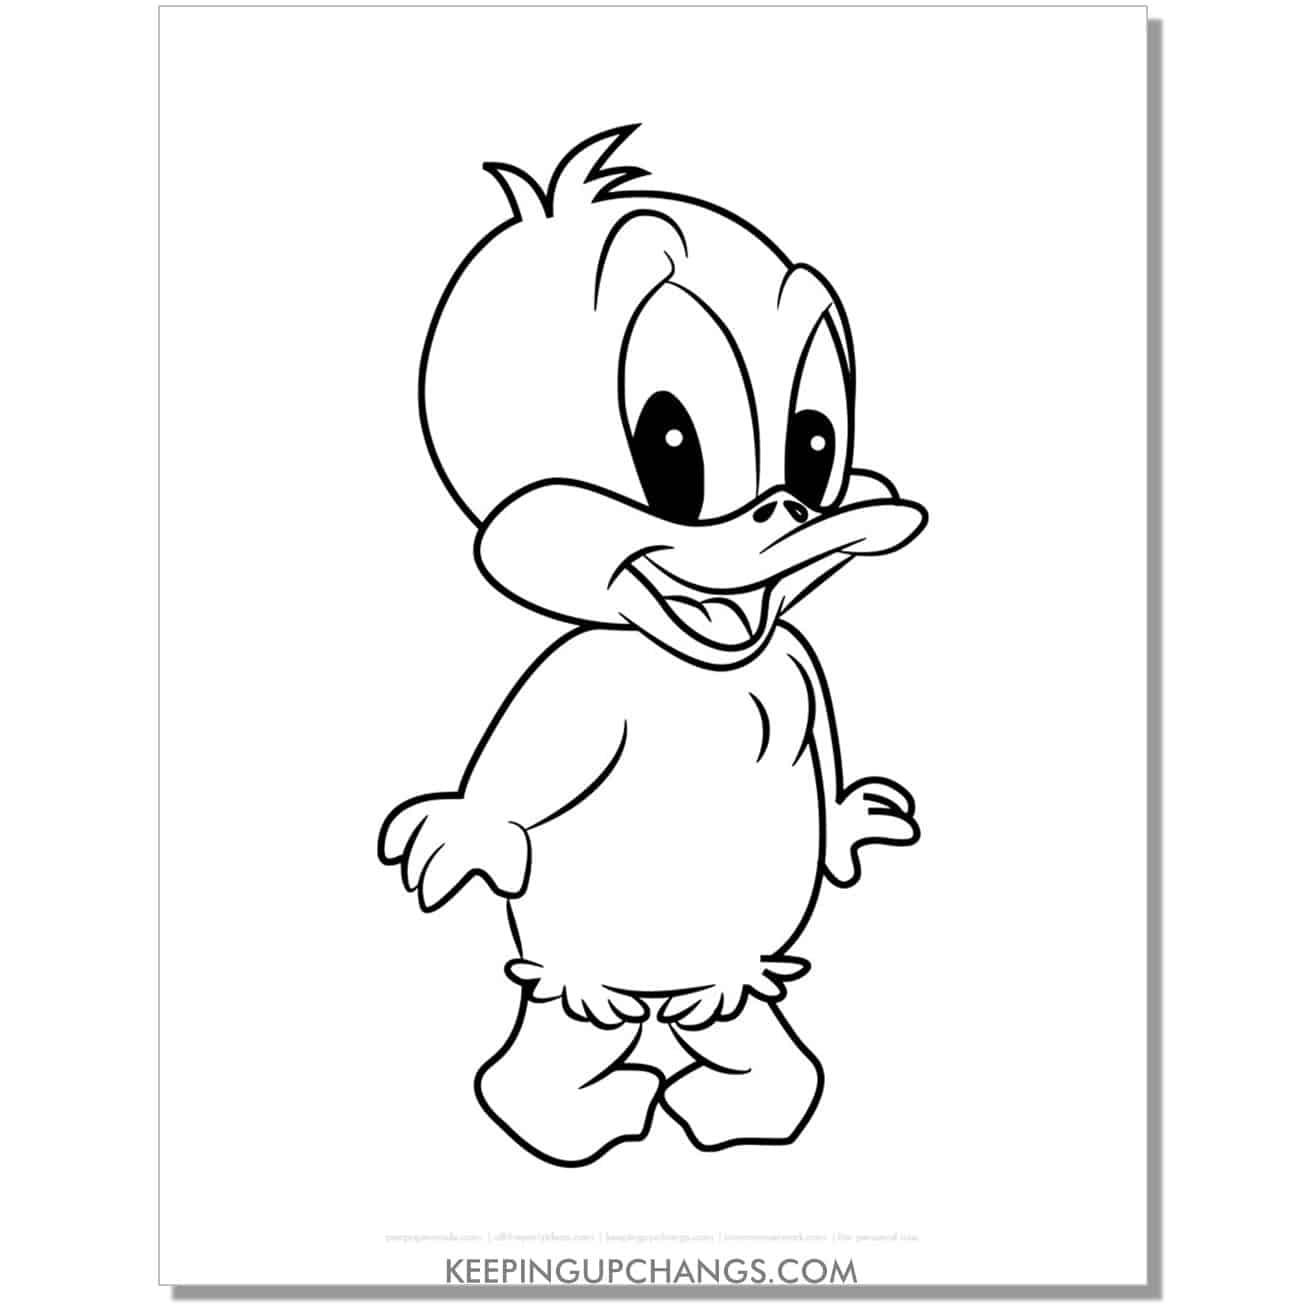 free baby daffy duck looney tunes coloring page, sheet.